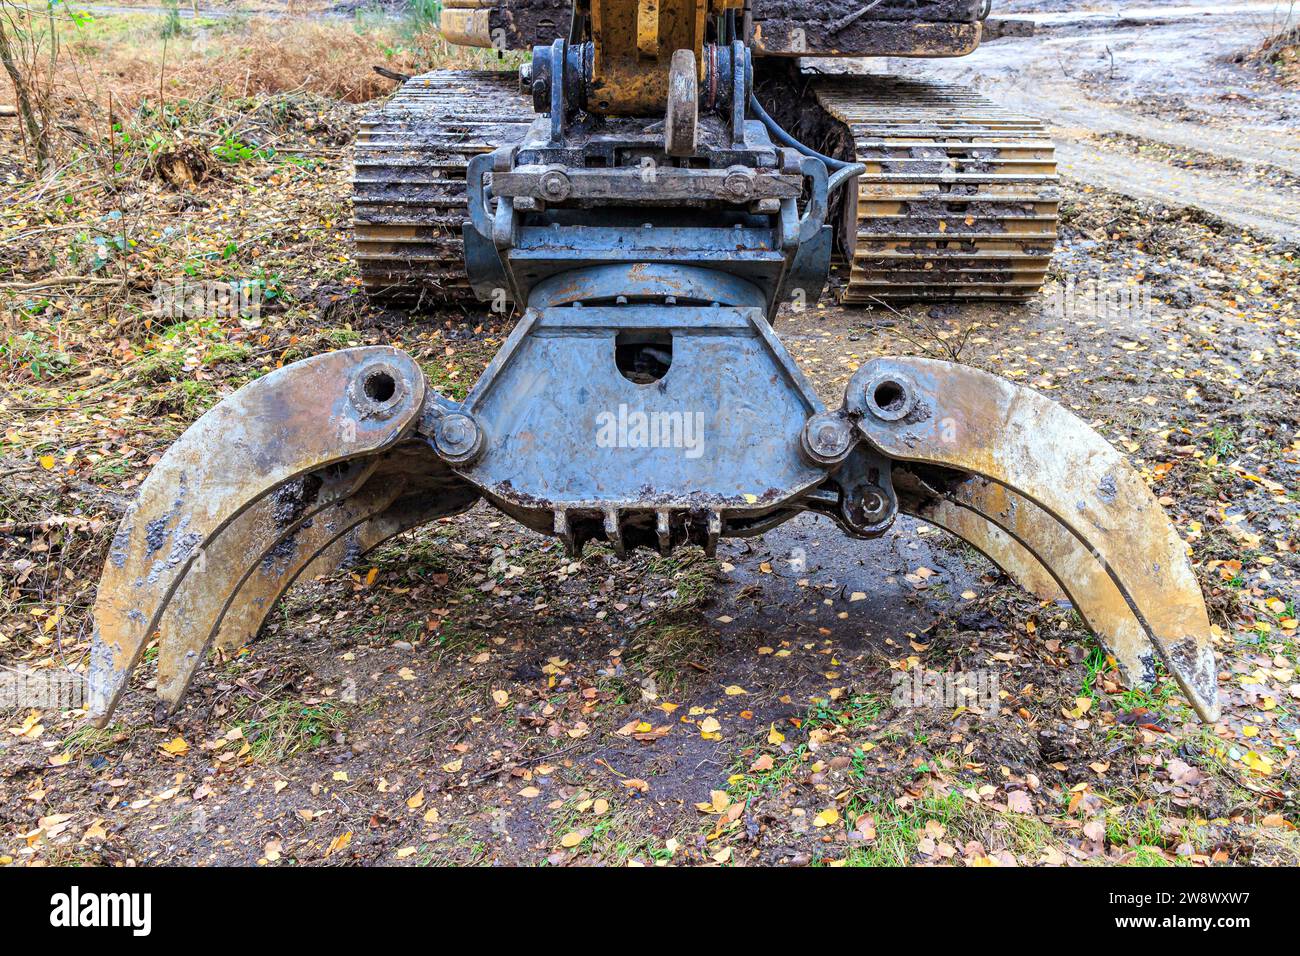 Close-up of open grabs of an grapple excavator, muddy ground in background, forestry workplace in controlled reforestation and maintenance in forest Stock Photo